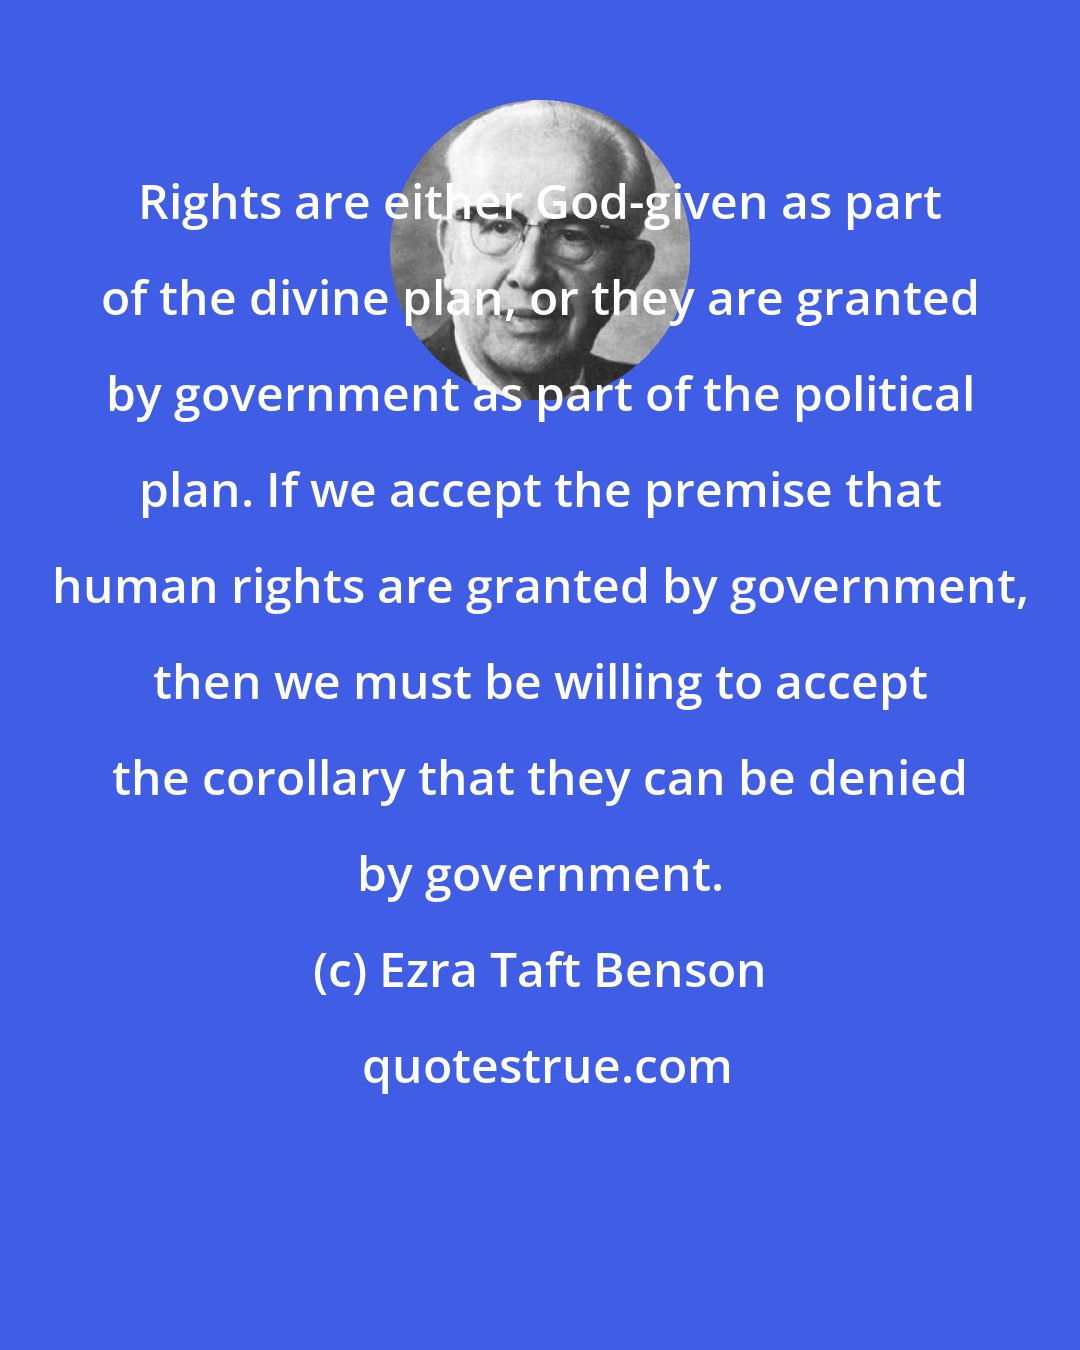 Ezra Taft Benson: Rights are either God-given as part of the divine plan, or they are granted by government as part of the political plan. If we accept the premise that human rights are granted by government, then we must be willing to accept the corollary that they can be denied by government.